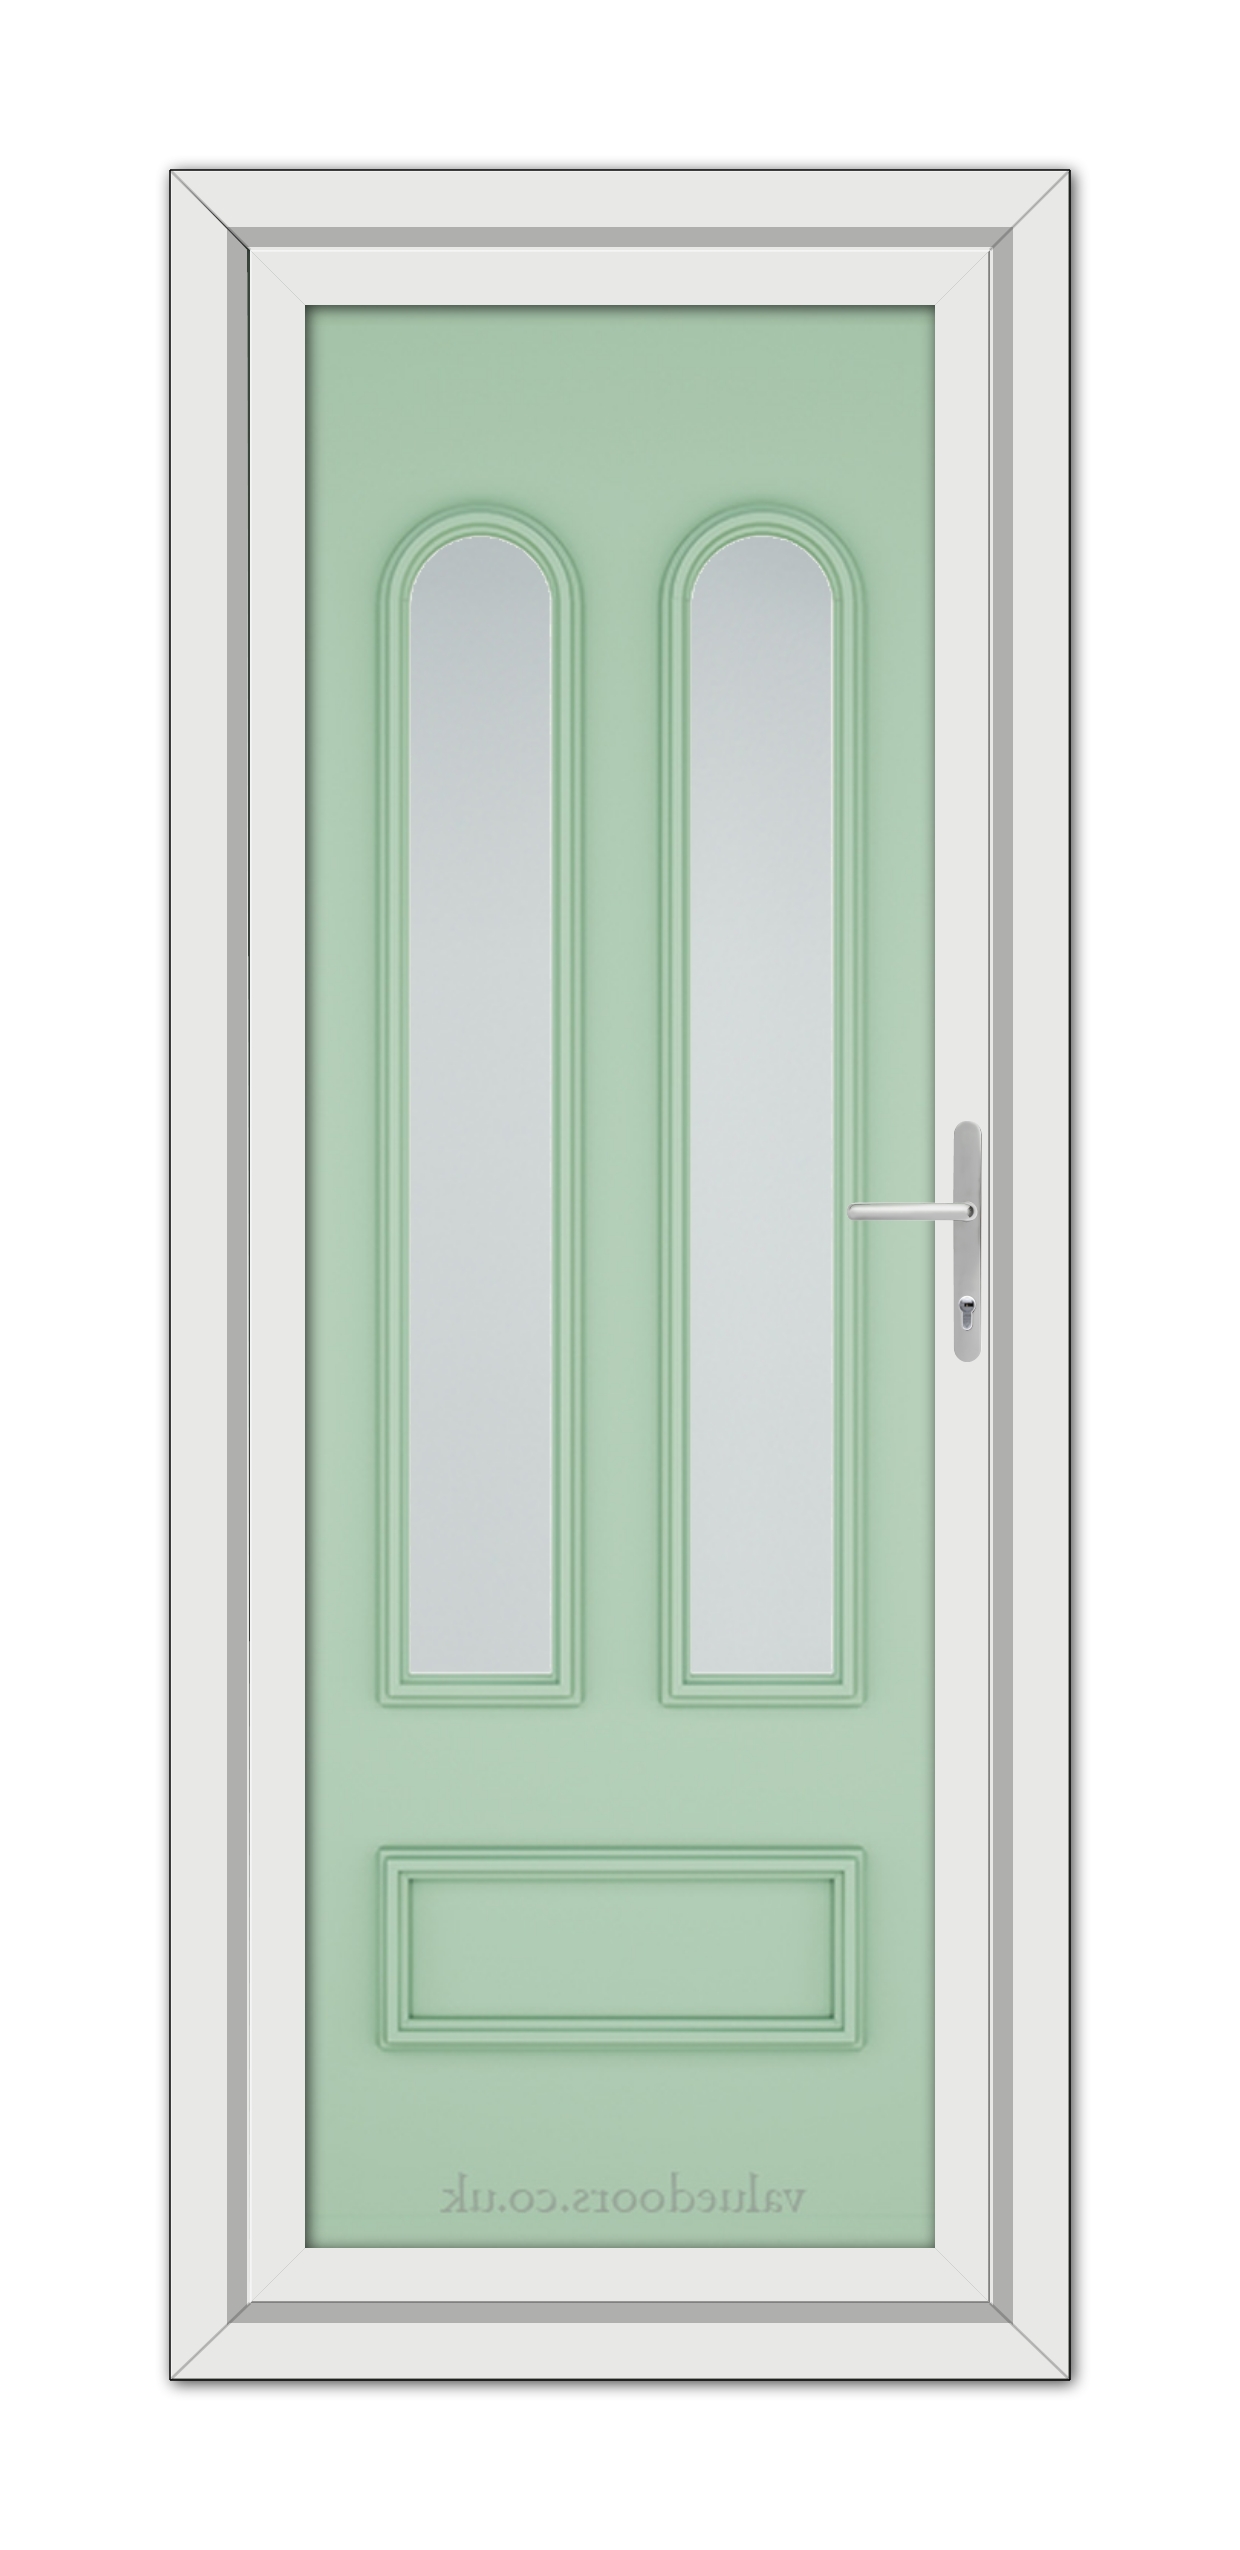 A close-up of a Chartwell Green Madrid uPVC Door.